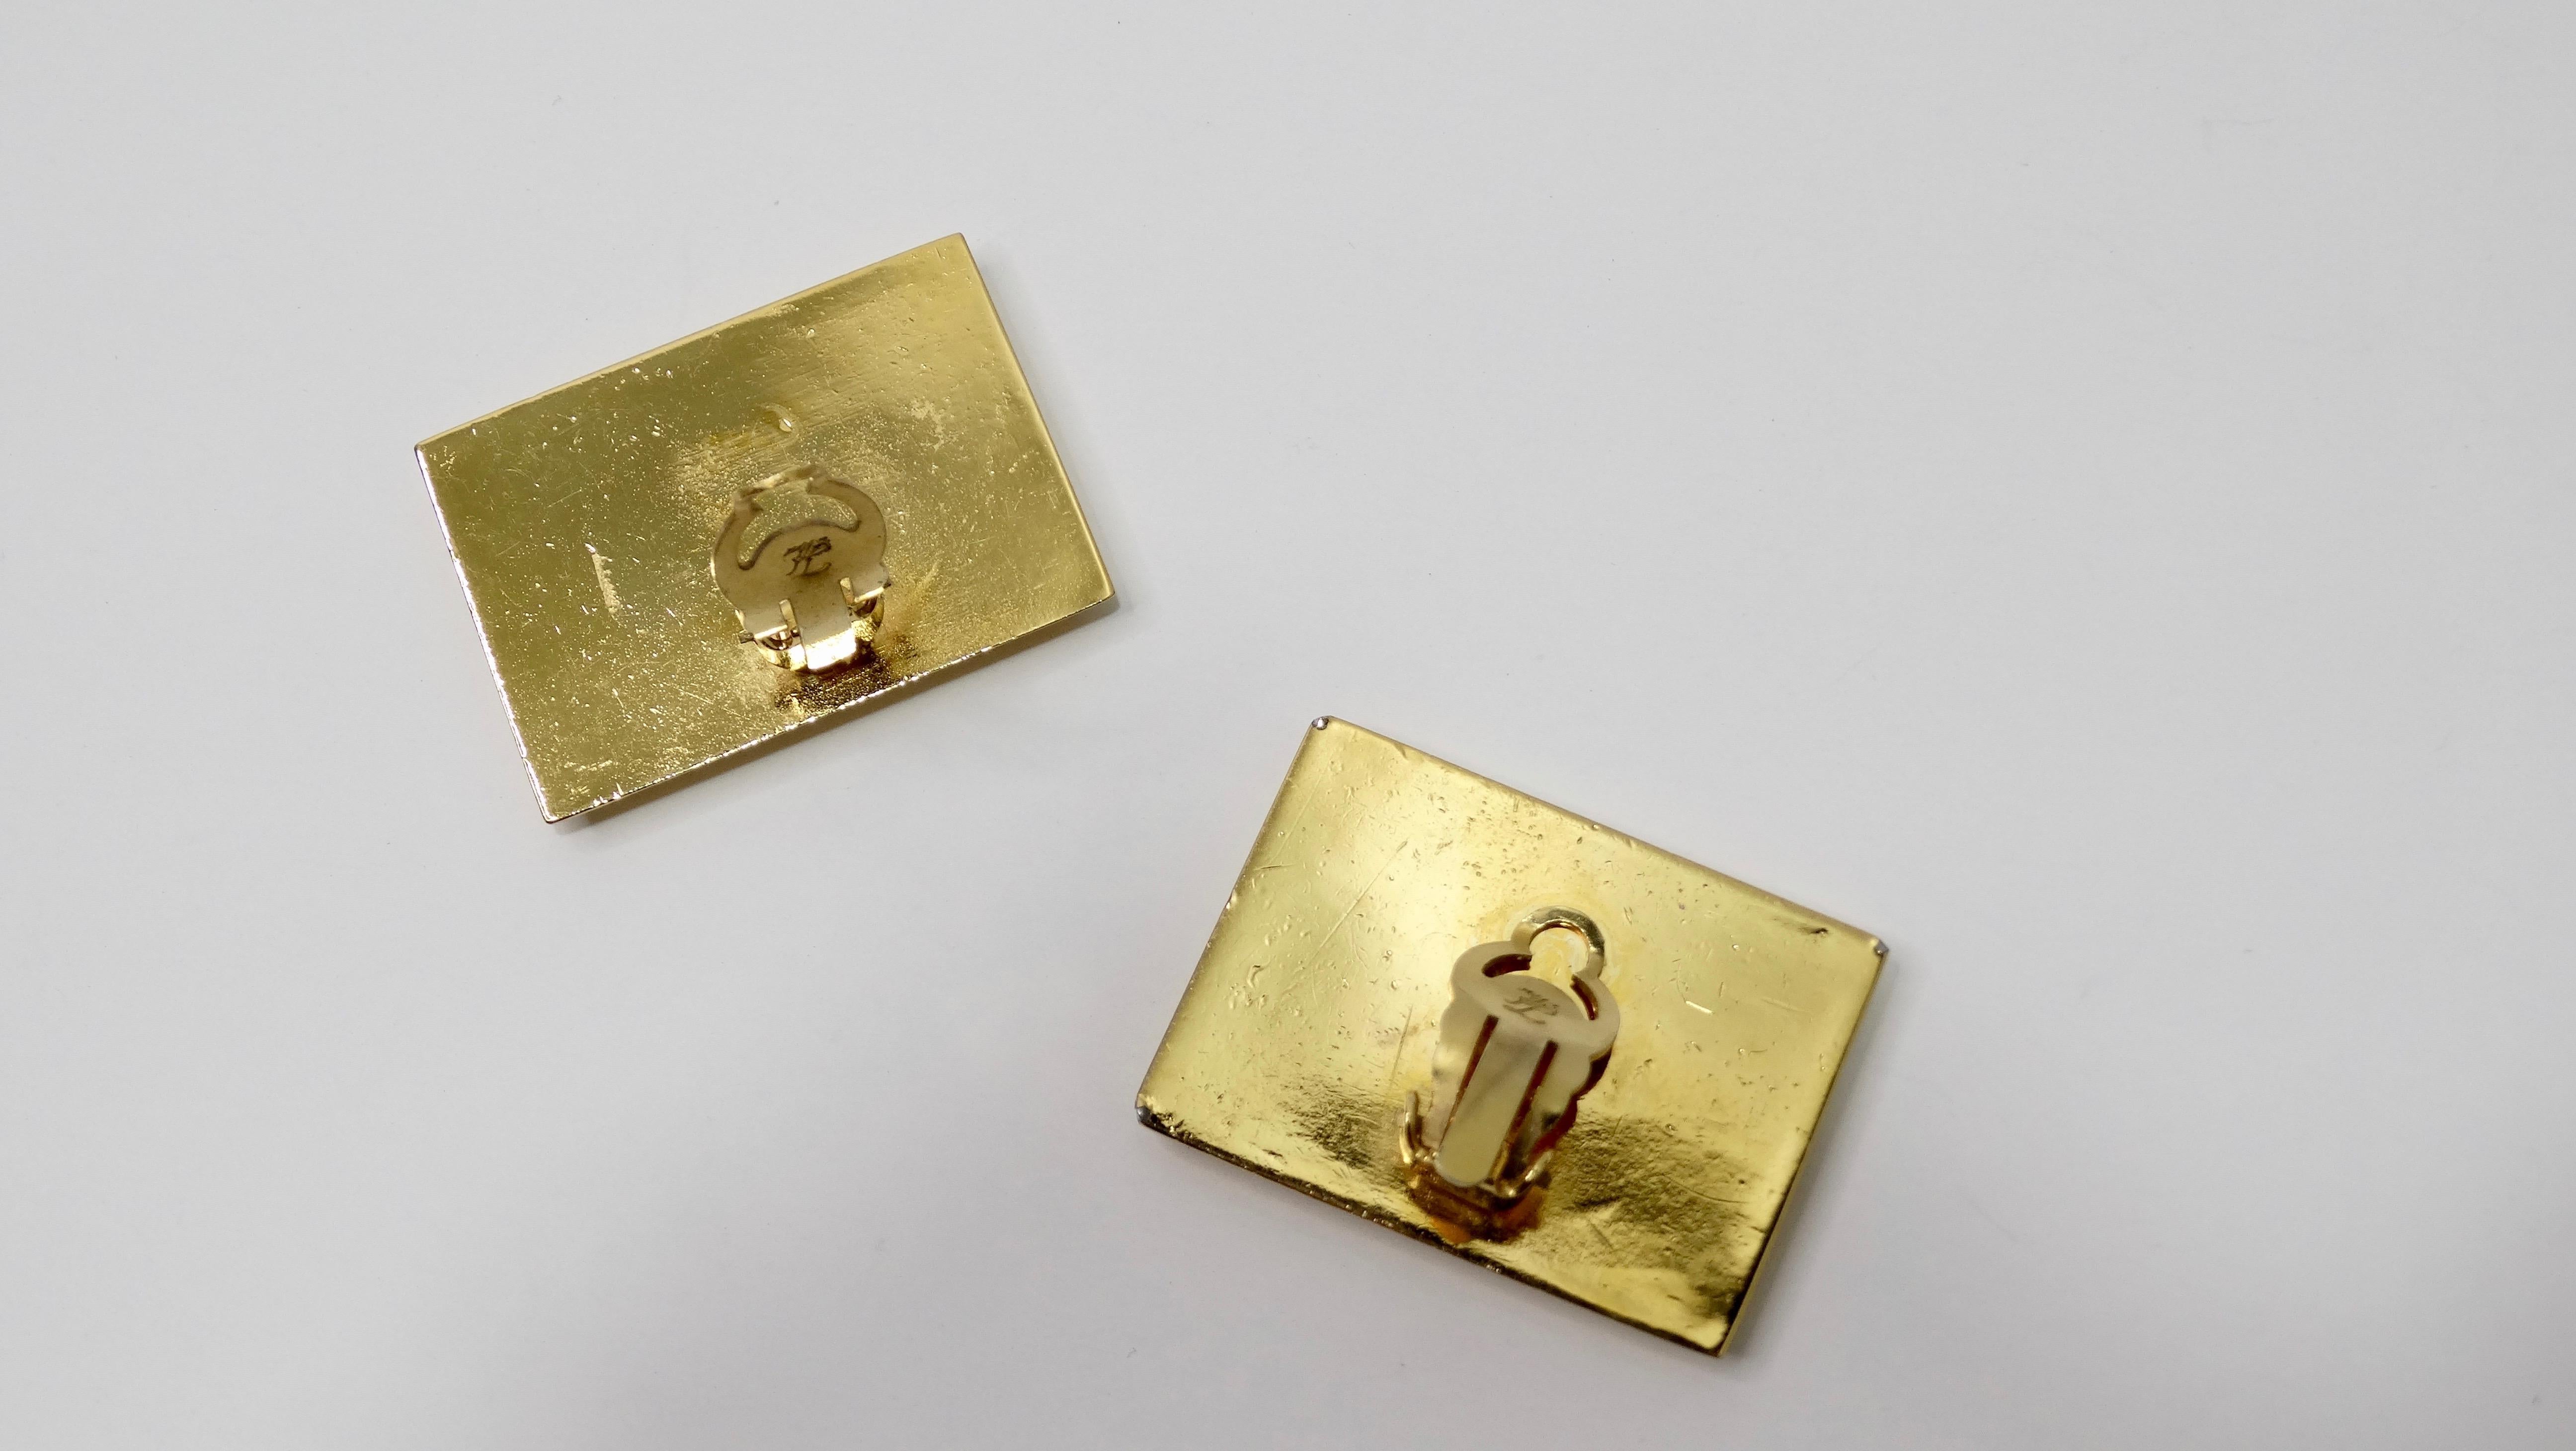 Get your hands on some rare vintage Lagerfeld with these adorable earrings! Circa 1980s, these letter/postcard earrings are gold plated and are embossed with Karl Lagerfeld Paris. Clip on closures that are stamped in Lagerfeld's signature cursive